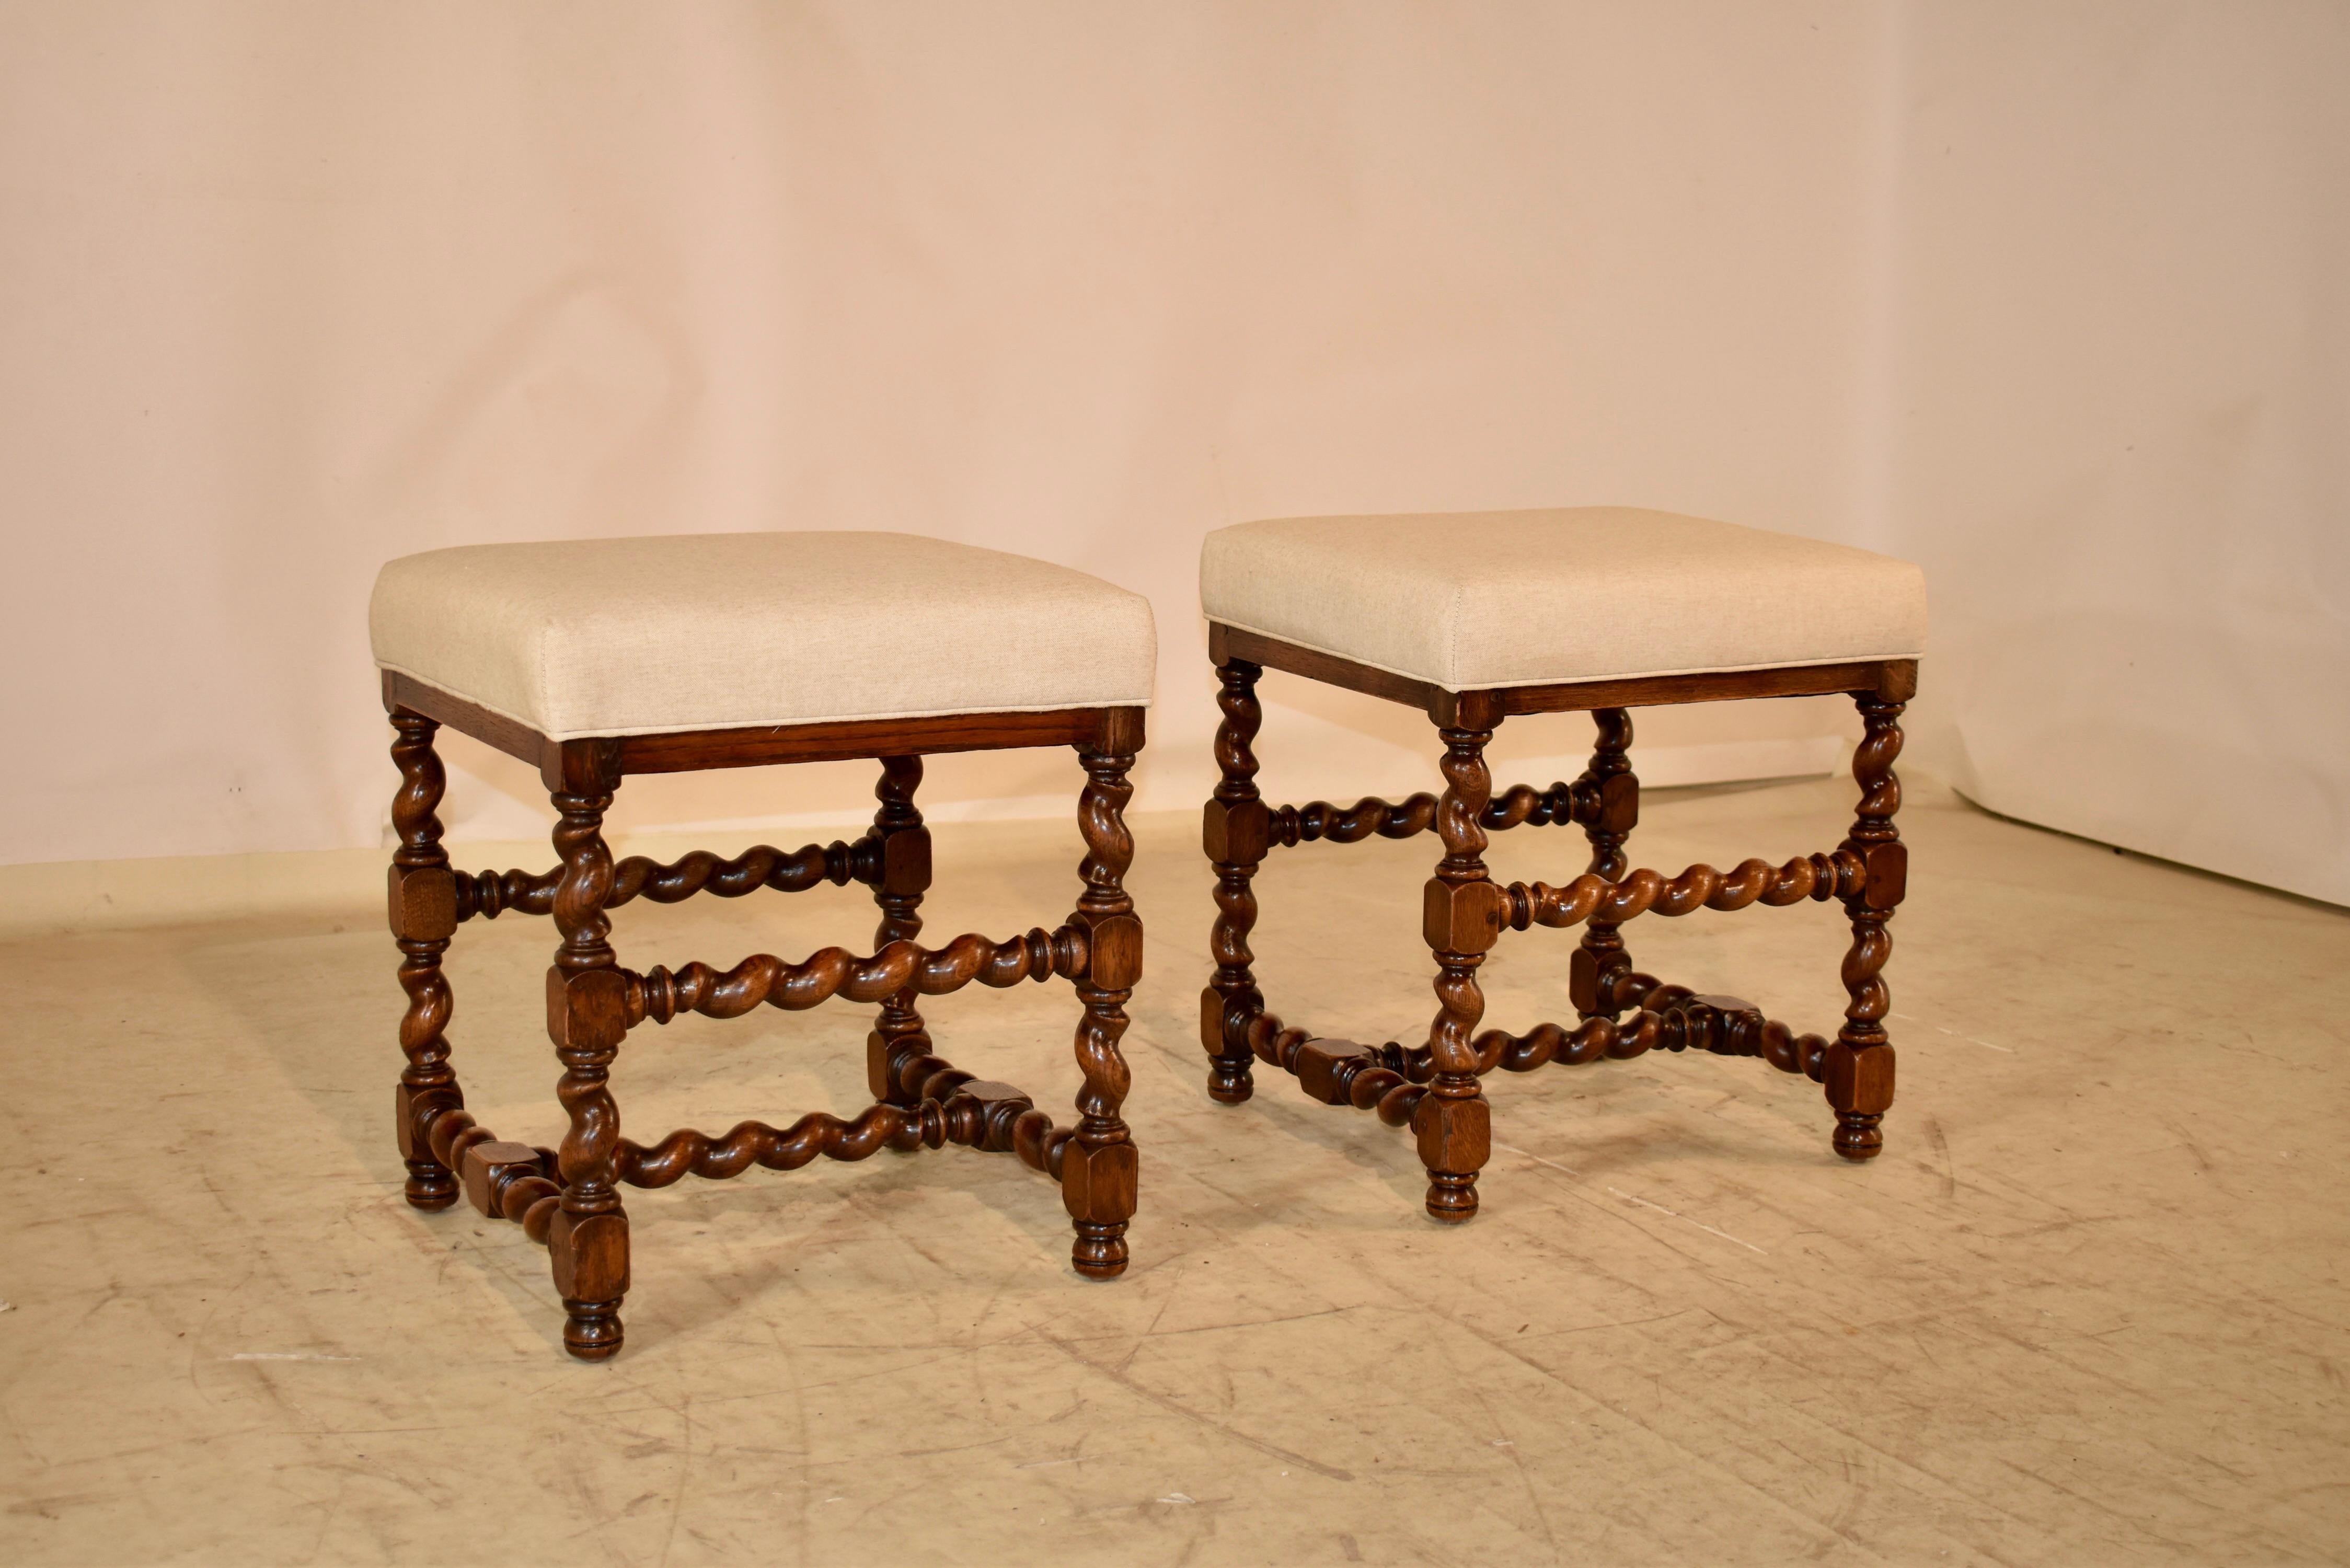 Pair of 19th century oak stools from France with newly upholstered tops in linen finished with a single welt. The frames have hand-turned barley twist legs, joined by matching stretchers and raised on small bun feet.